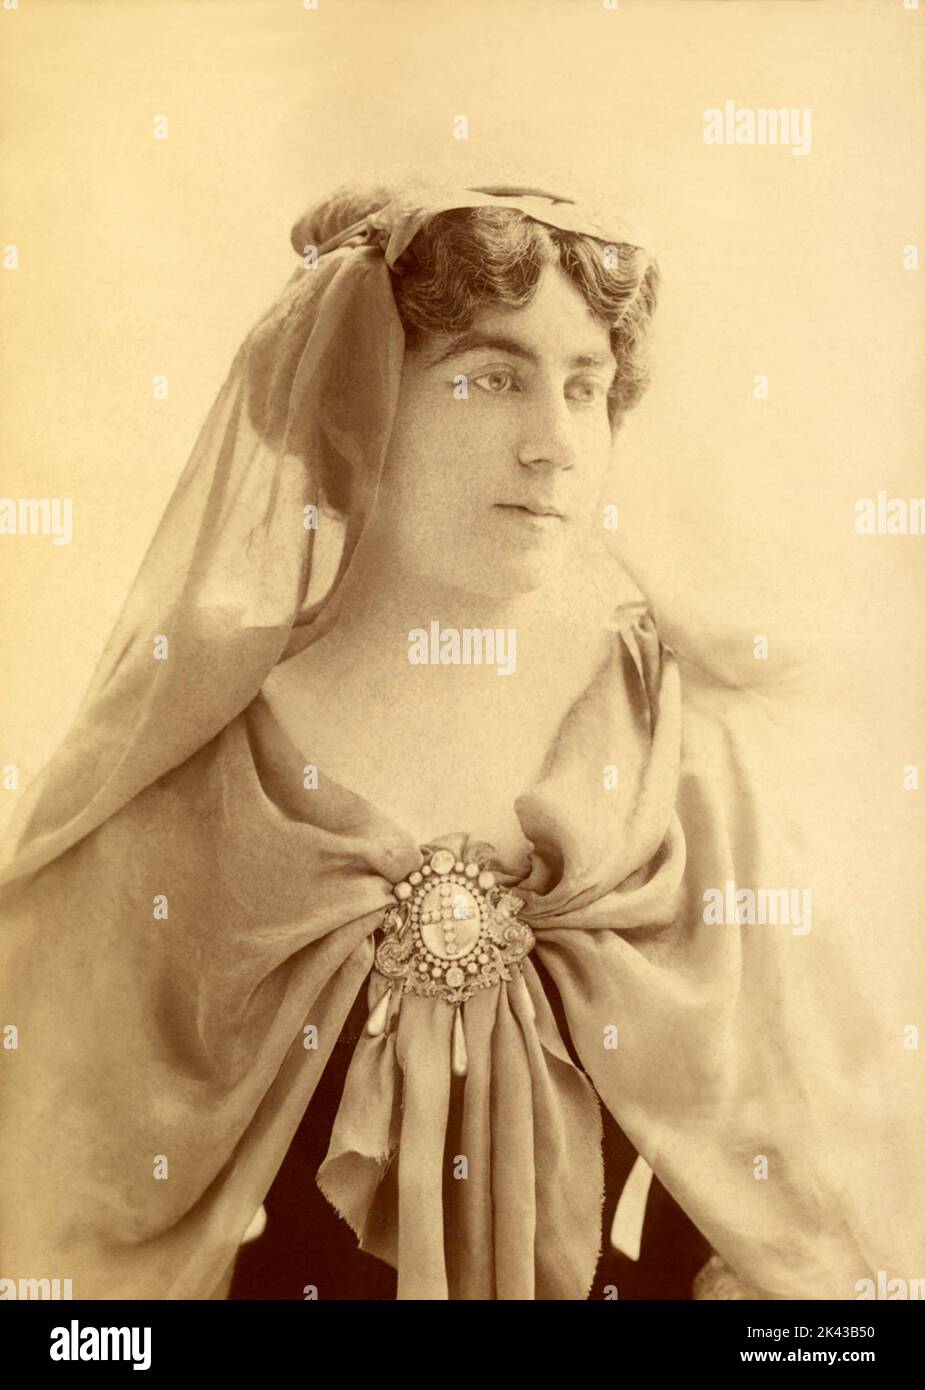 1895 ca , Paris , FRANCE : The celebrated french opera singer LOUISE GRANDJEAN ( 1870 - 1934 ) . Operatic soprano who was particularly admired for her portrayals of Richard Wagner and Giuseppe Verdi heroines . She began her career in Paris in 1894 where she became a popular and active singer until 1911. She also regularly appeared in Germany during the first decade of the twentieth century with great success. Photo by Reutlinger  , Paris . - BELLE EPOQUE - OPERA LIRICA - DIVA - DIVINA - OPERA LIRICA - CANTANTE - '800  - 800's ---  Archivio GBB Stock Photo